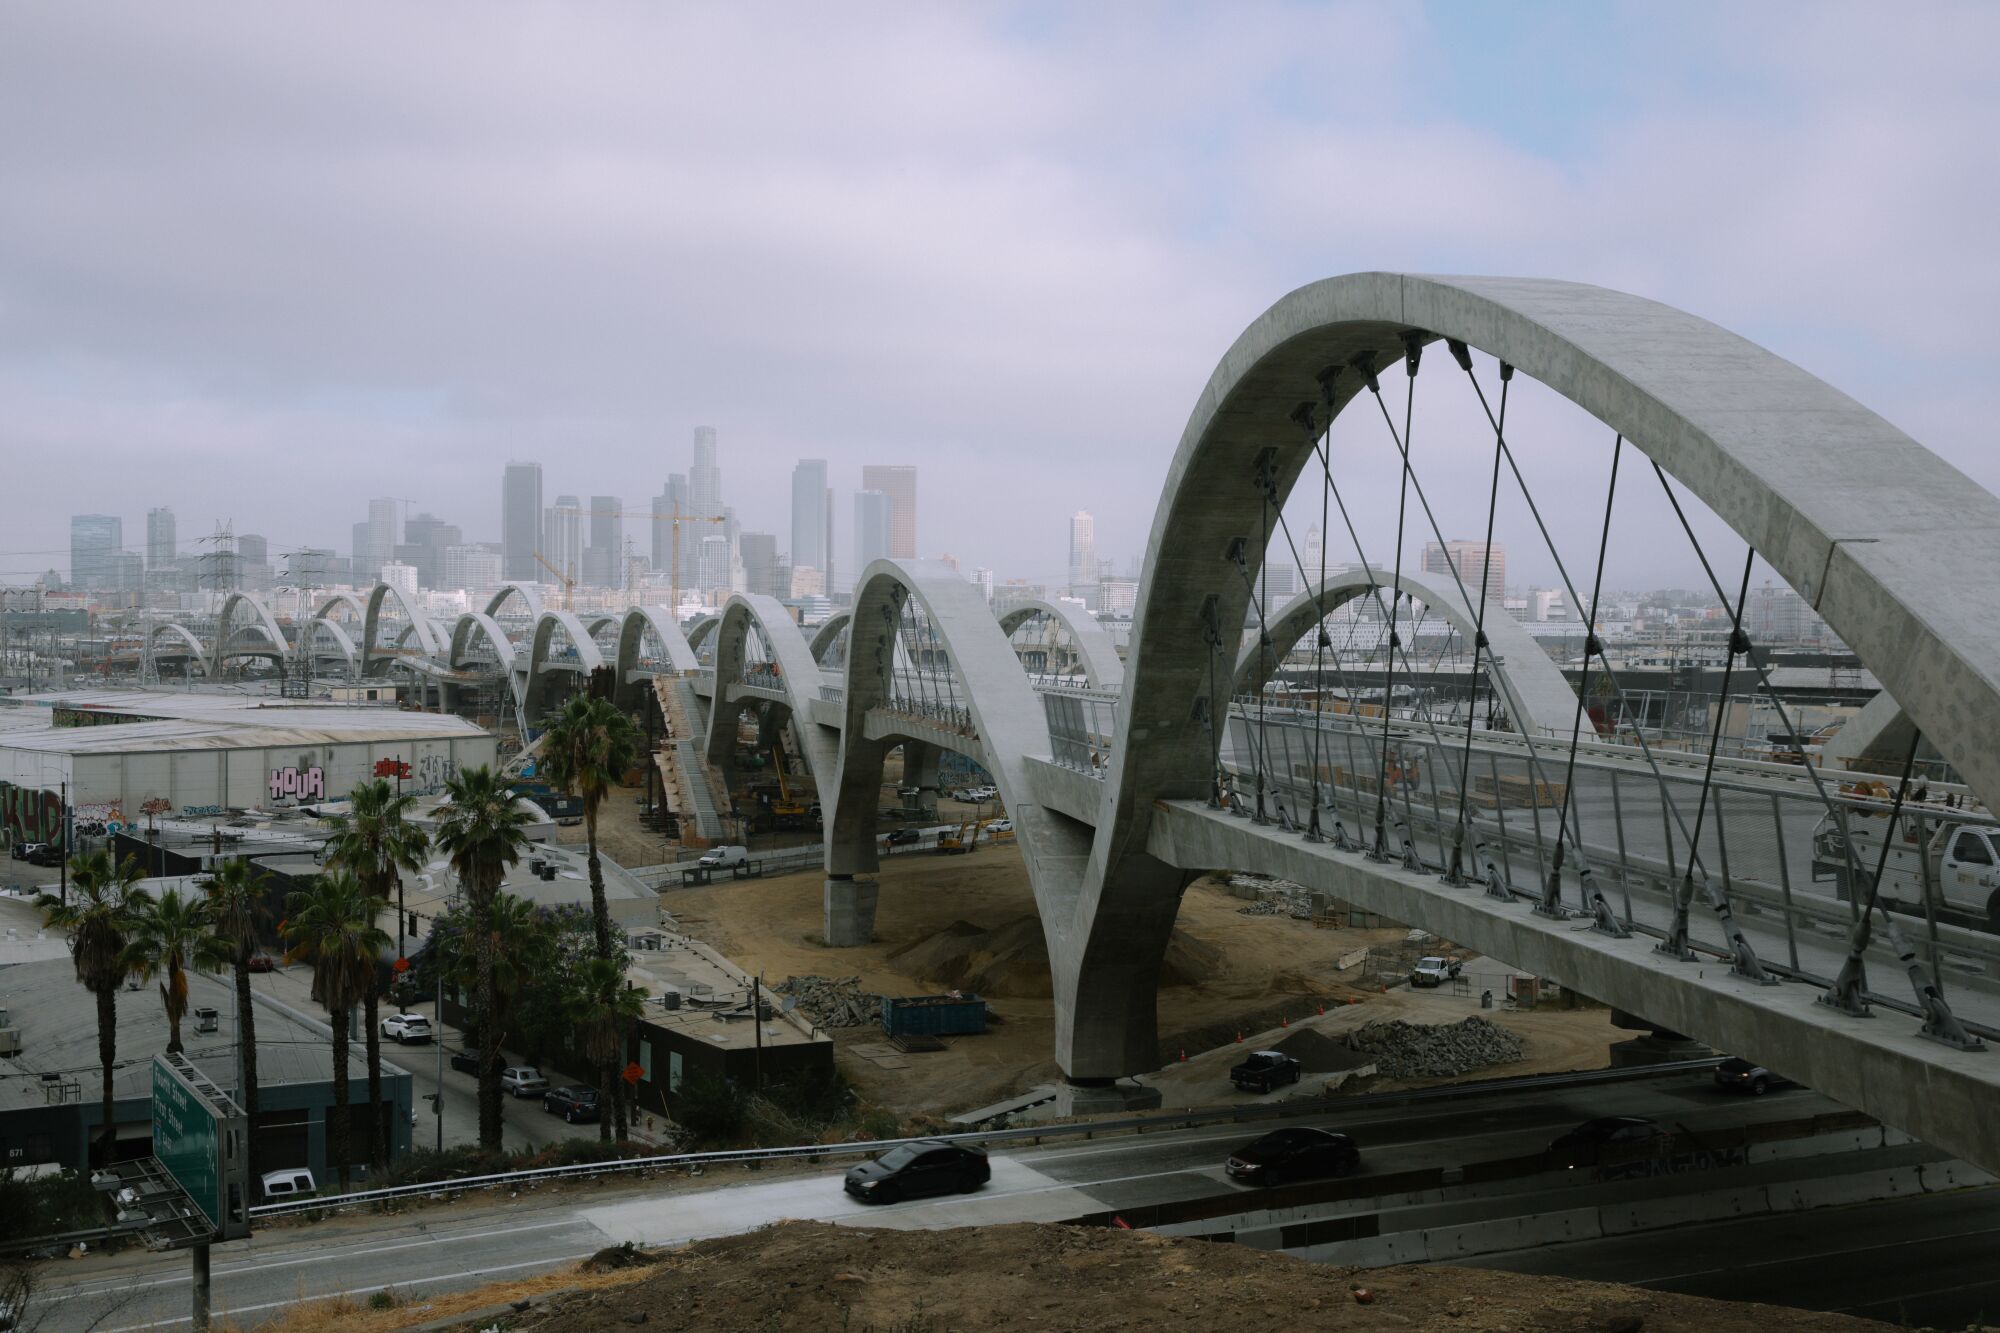 A view of the nearly completed 6th Street Viaduct from the east side of the L.A. River shows the bridge's repeating arches